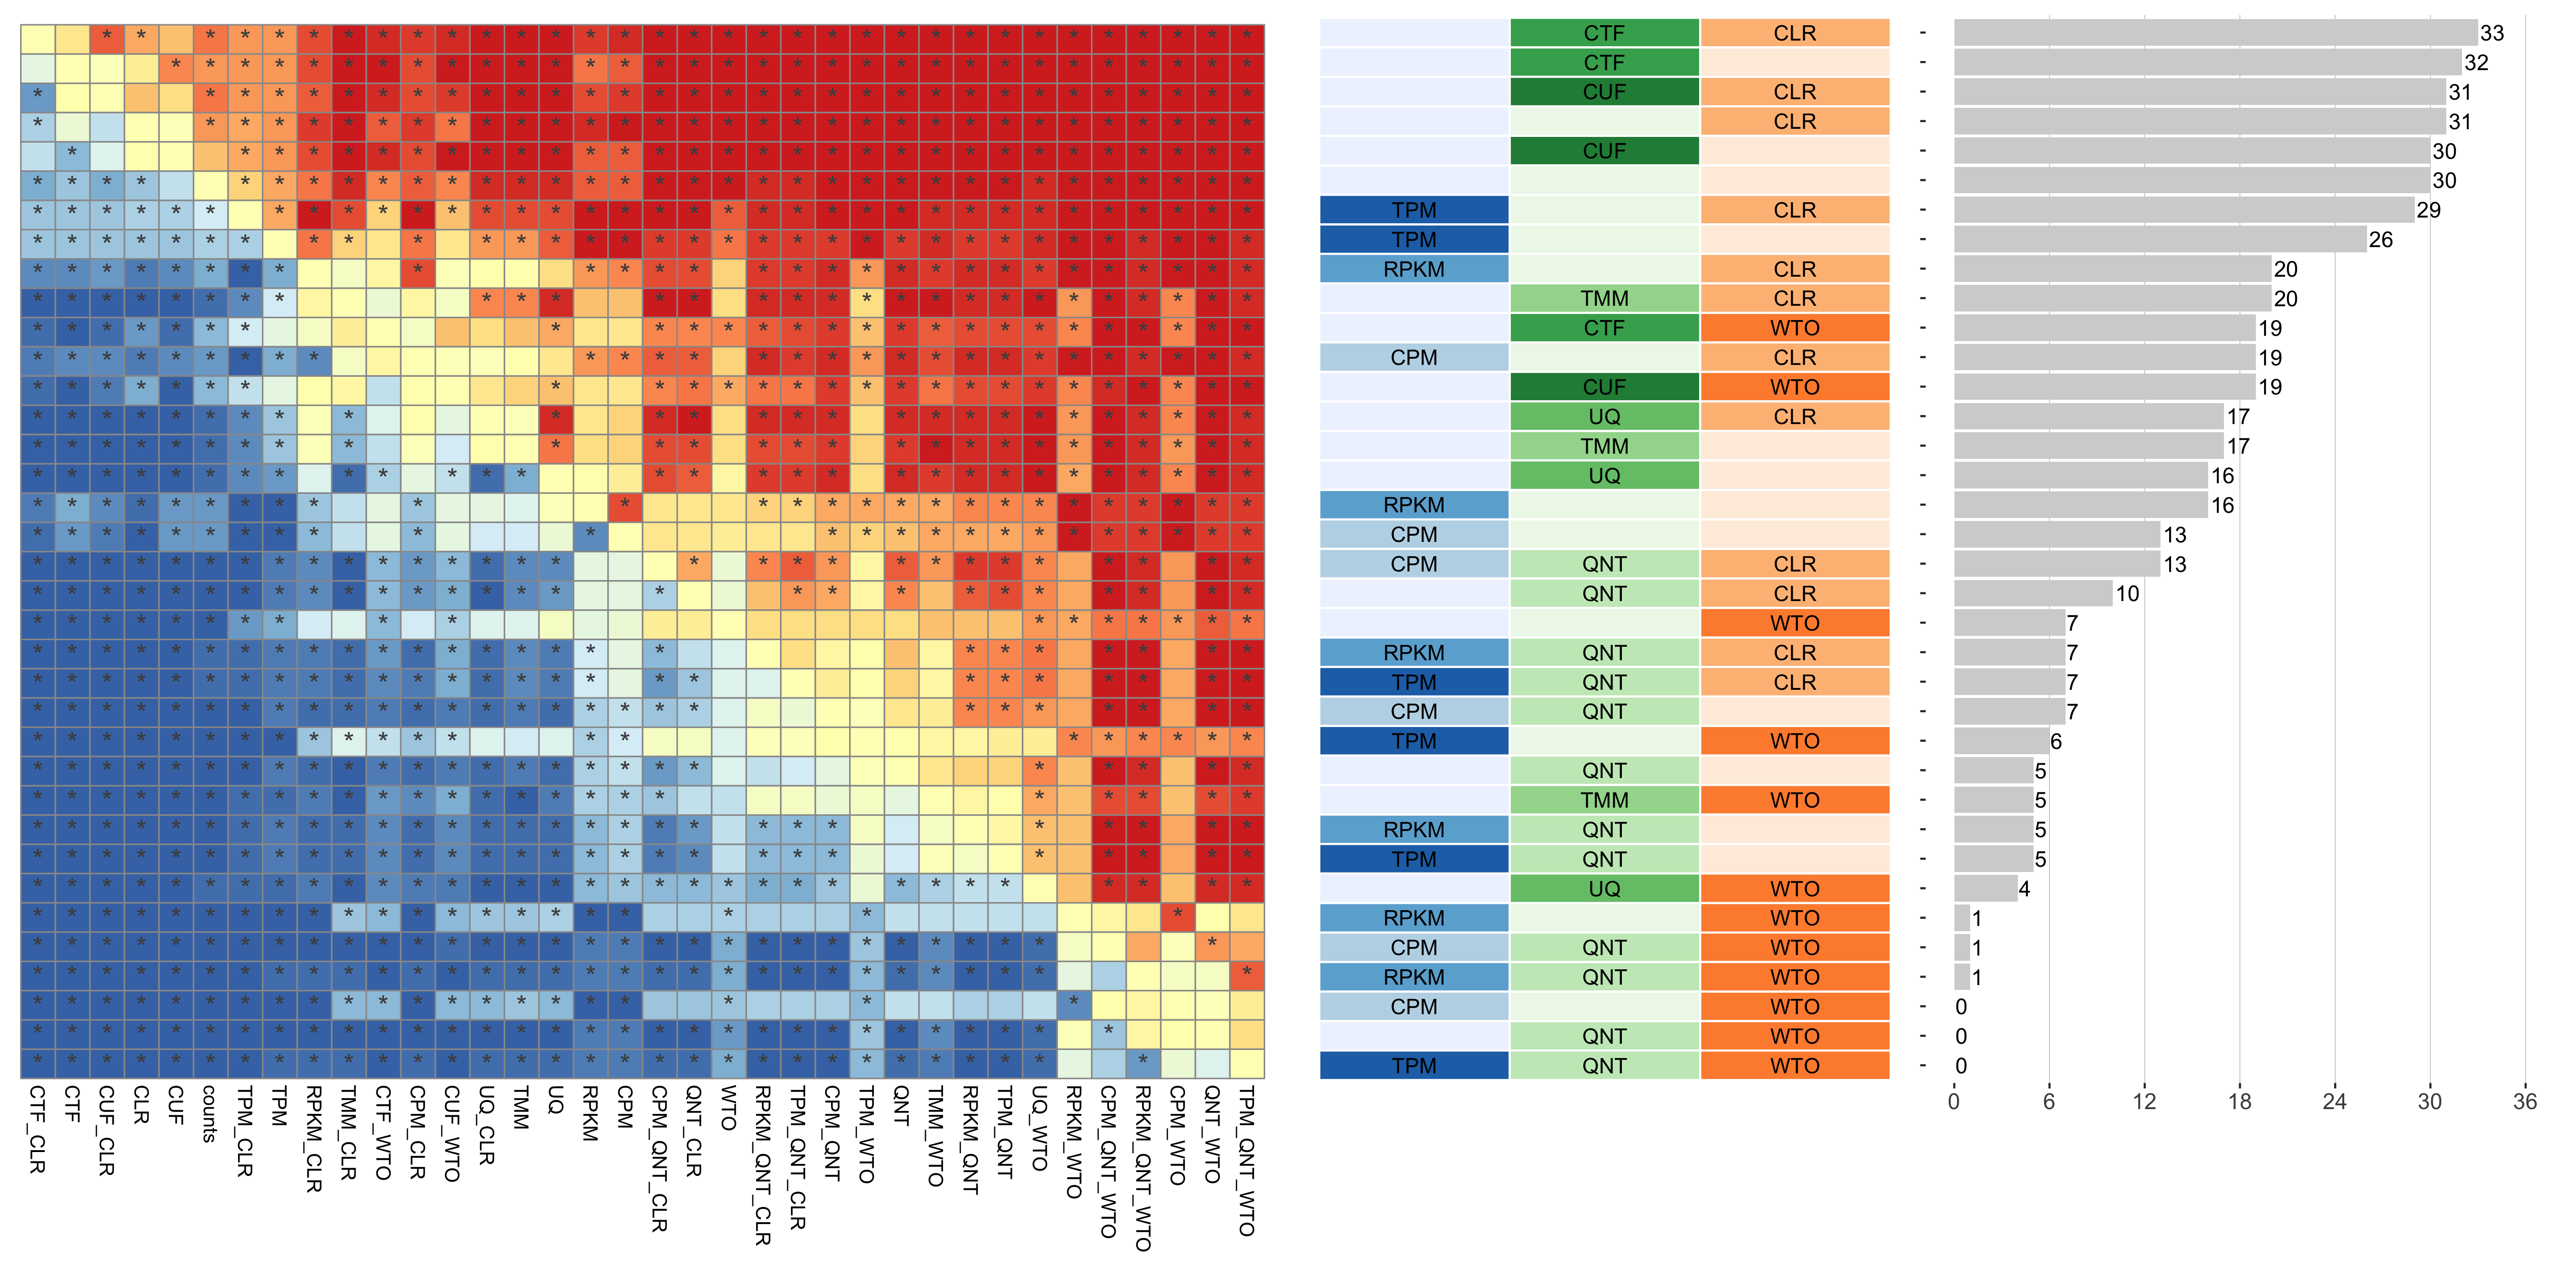 **Dataset-level pairwise comparison of workflow performance.** (**left**) The heatmap shows the relative performance of a pair of workflows, corresponding to a row and a column, directly compared to each other for the GTEx datasets based on the tissue-naive gold standard. The color in each cell (row, column) represents the proportion of datasets for which the workflow along the row has a higher auROC than the workflow along the column. Comparisons that are statistically significant (corrected p < 0.01) based on a paired Wilcoxon test are marked with an asterisk. (**middle**) The workflows (rows) are described in terms of the specific method used in the within-sample normalization (blues), between-sample normalization (greens), and network transformation (oranges) stages. (**right**) The barplot shows the number of times each workflow was significantly greater than another workflow.